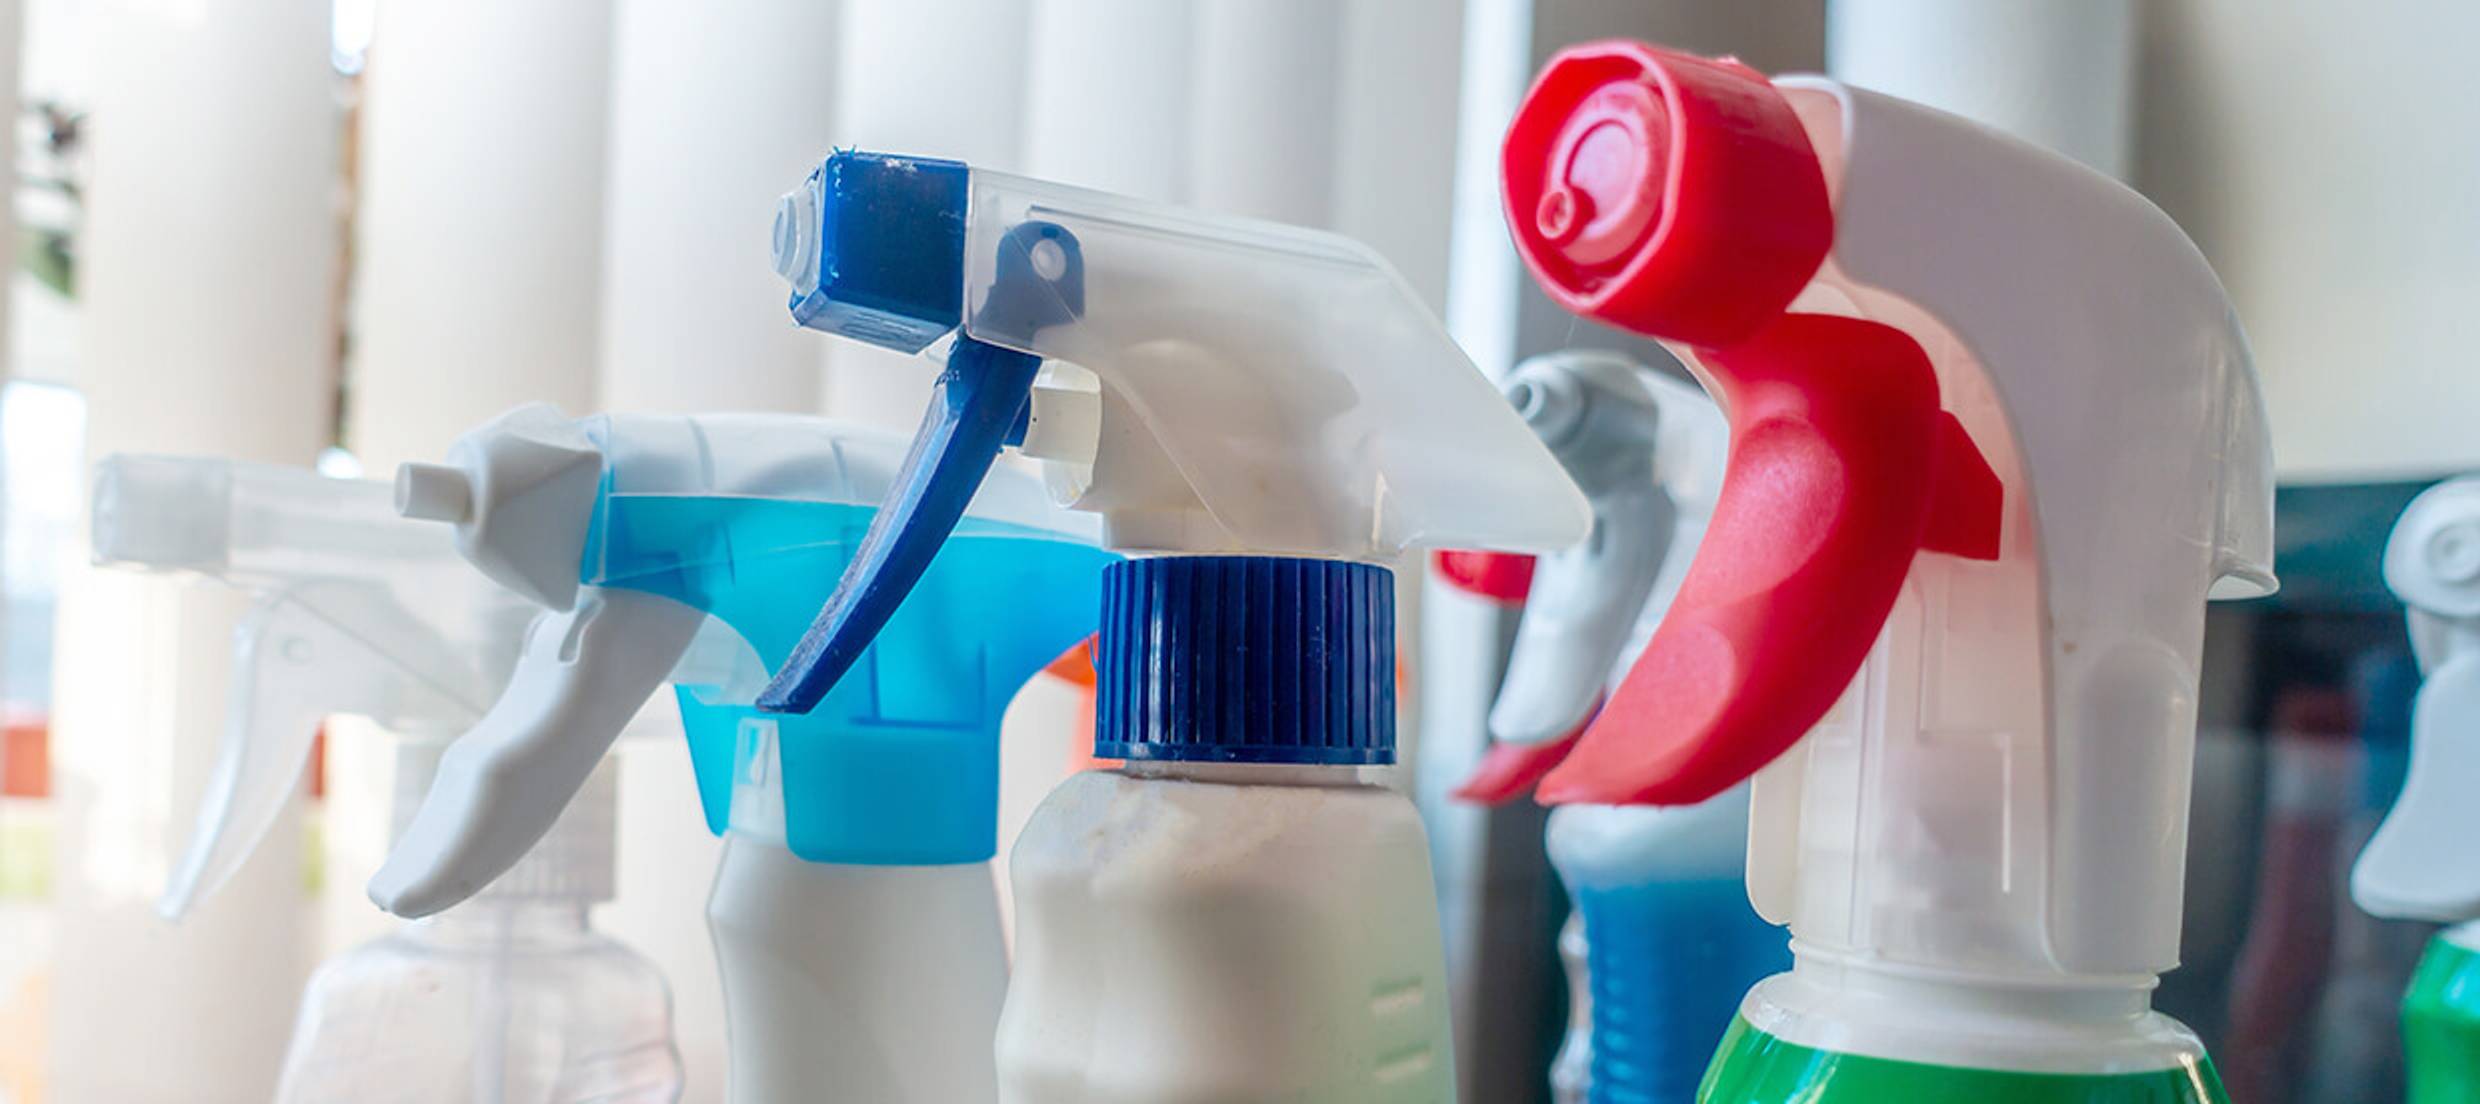 Variety of clinic disinfectants available - what should you use